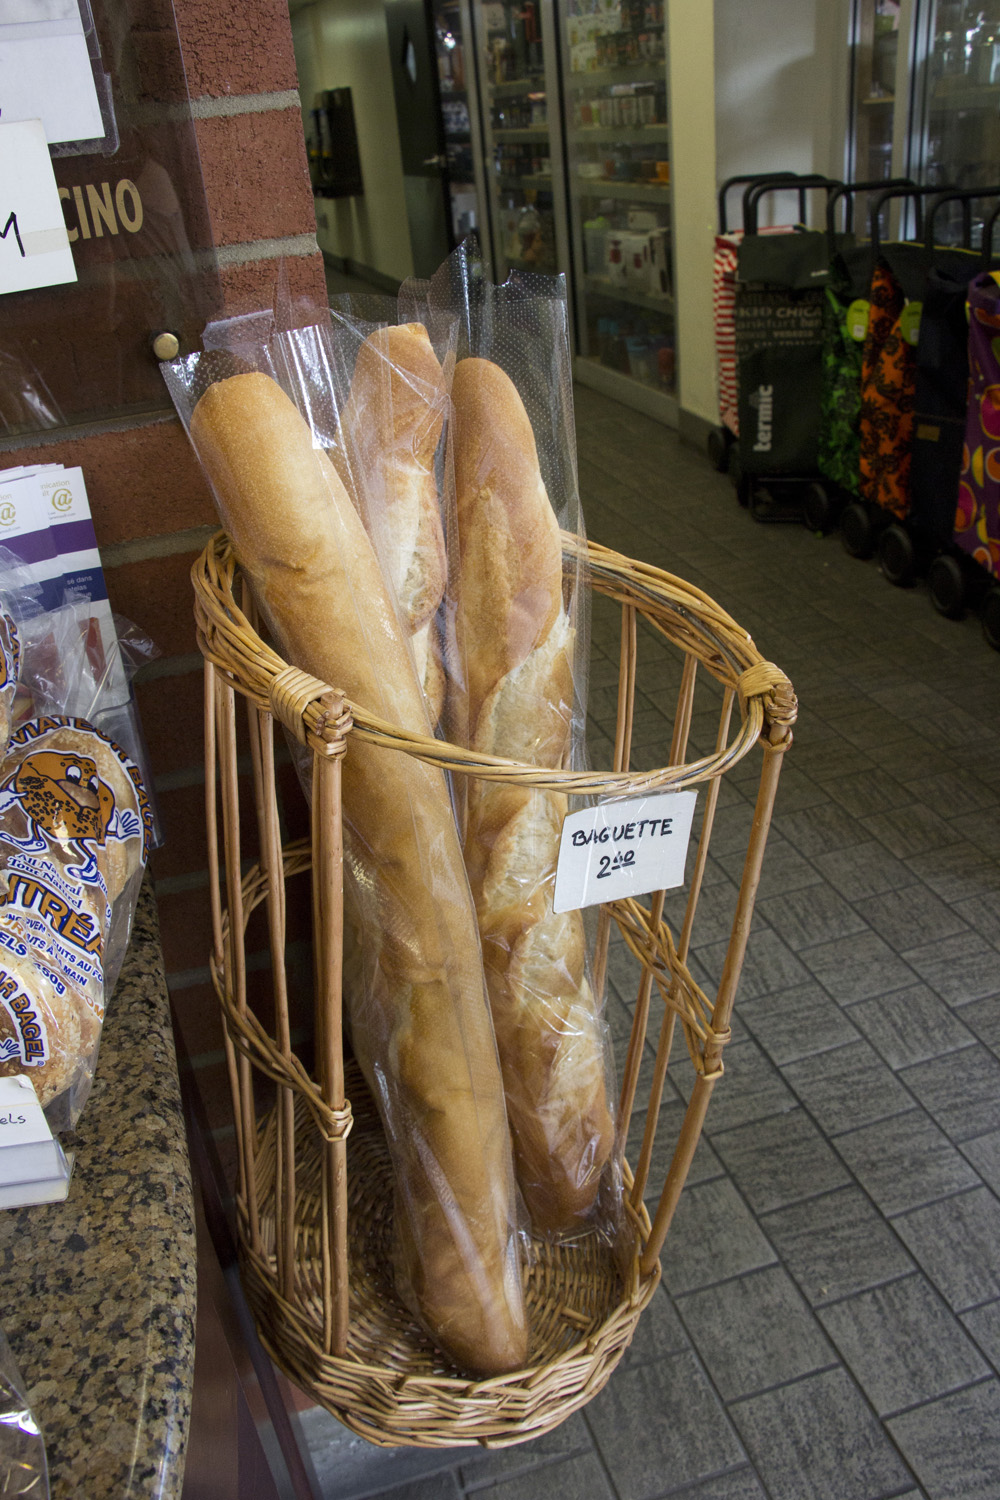 Baguettes at the Jean Talon Market | Montreal, Canada